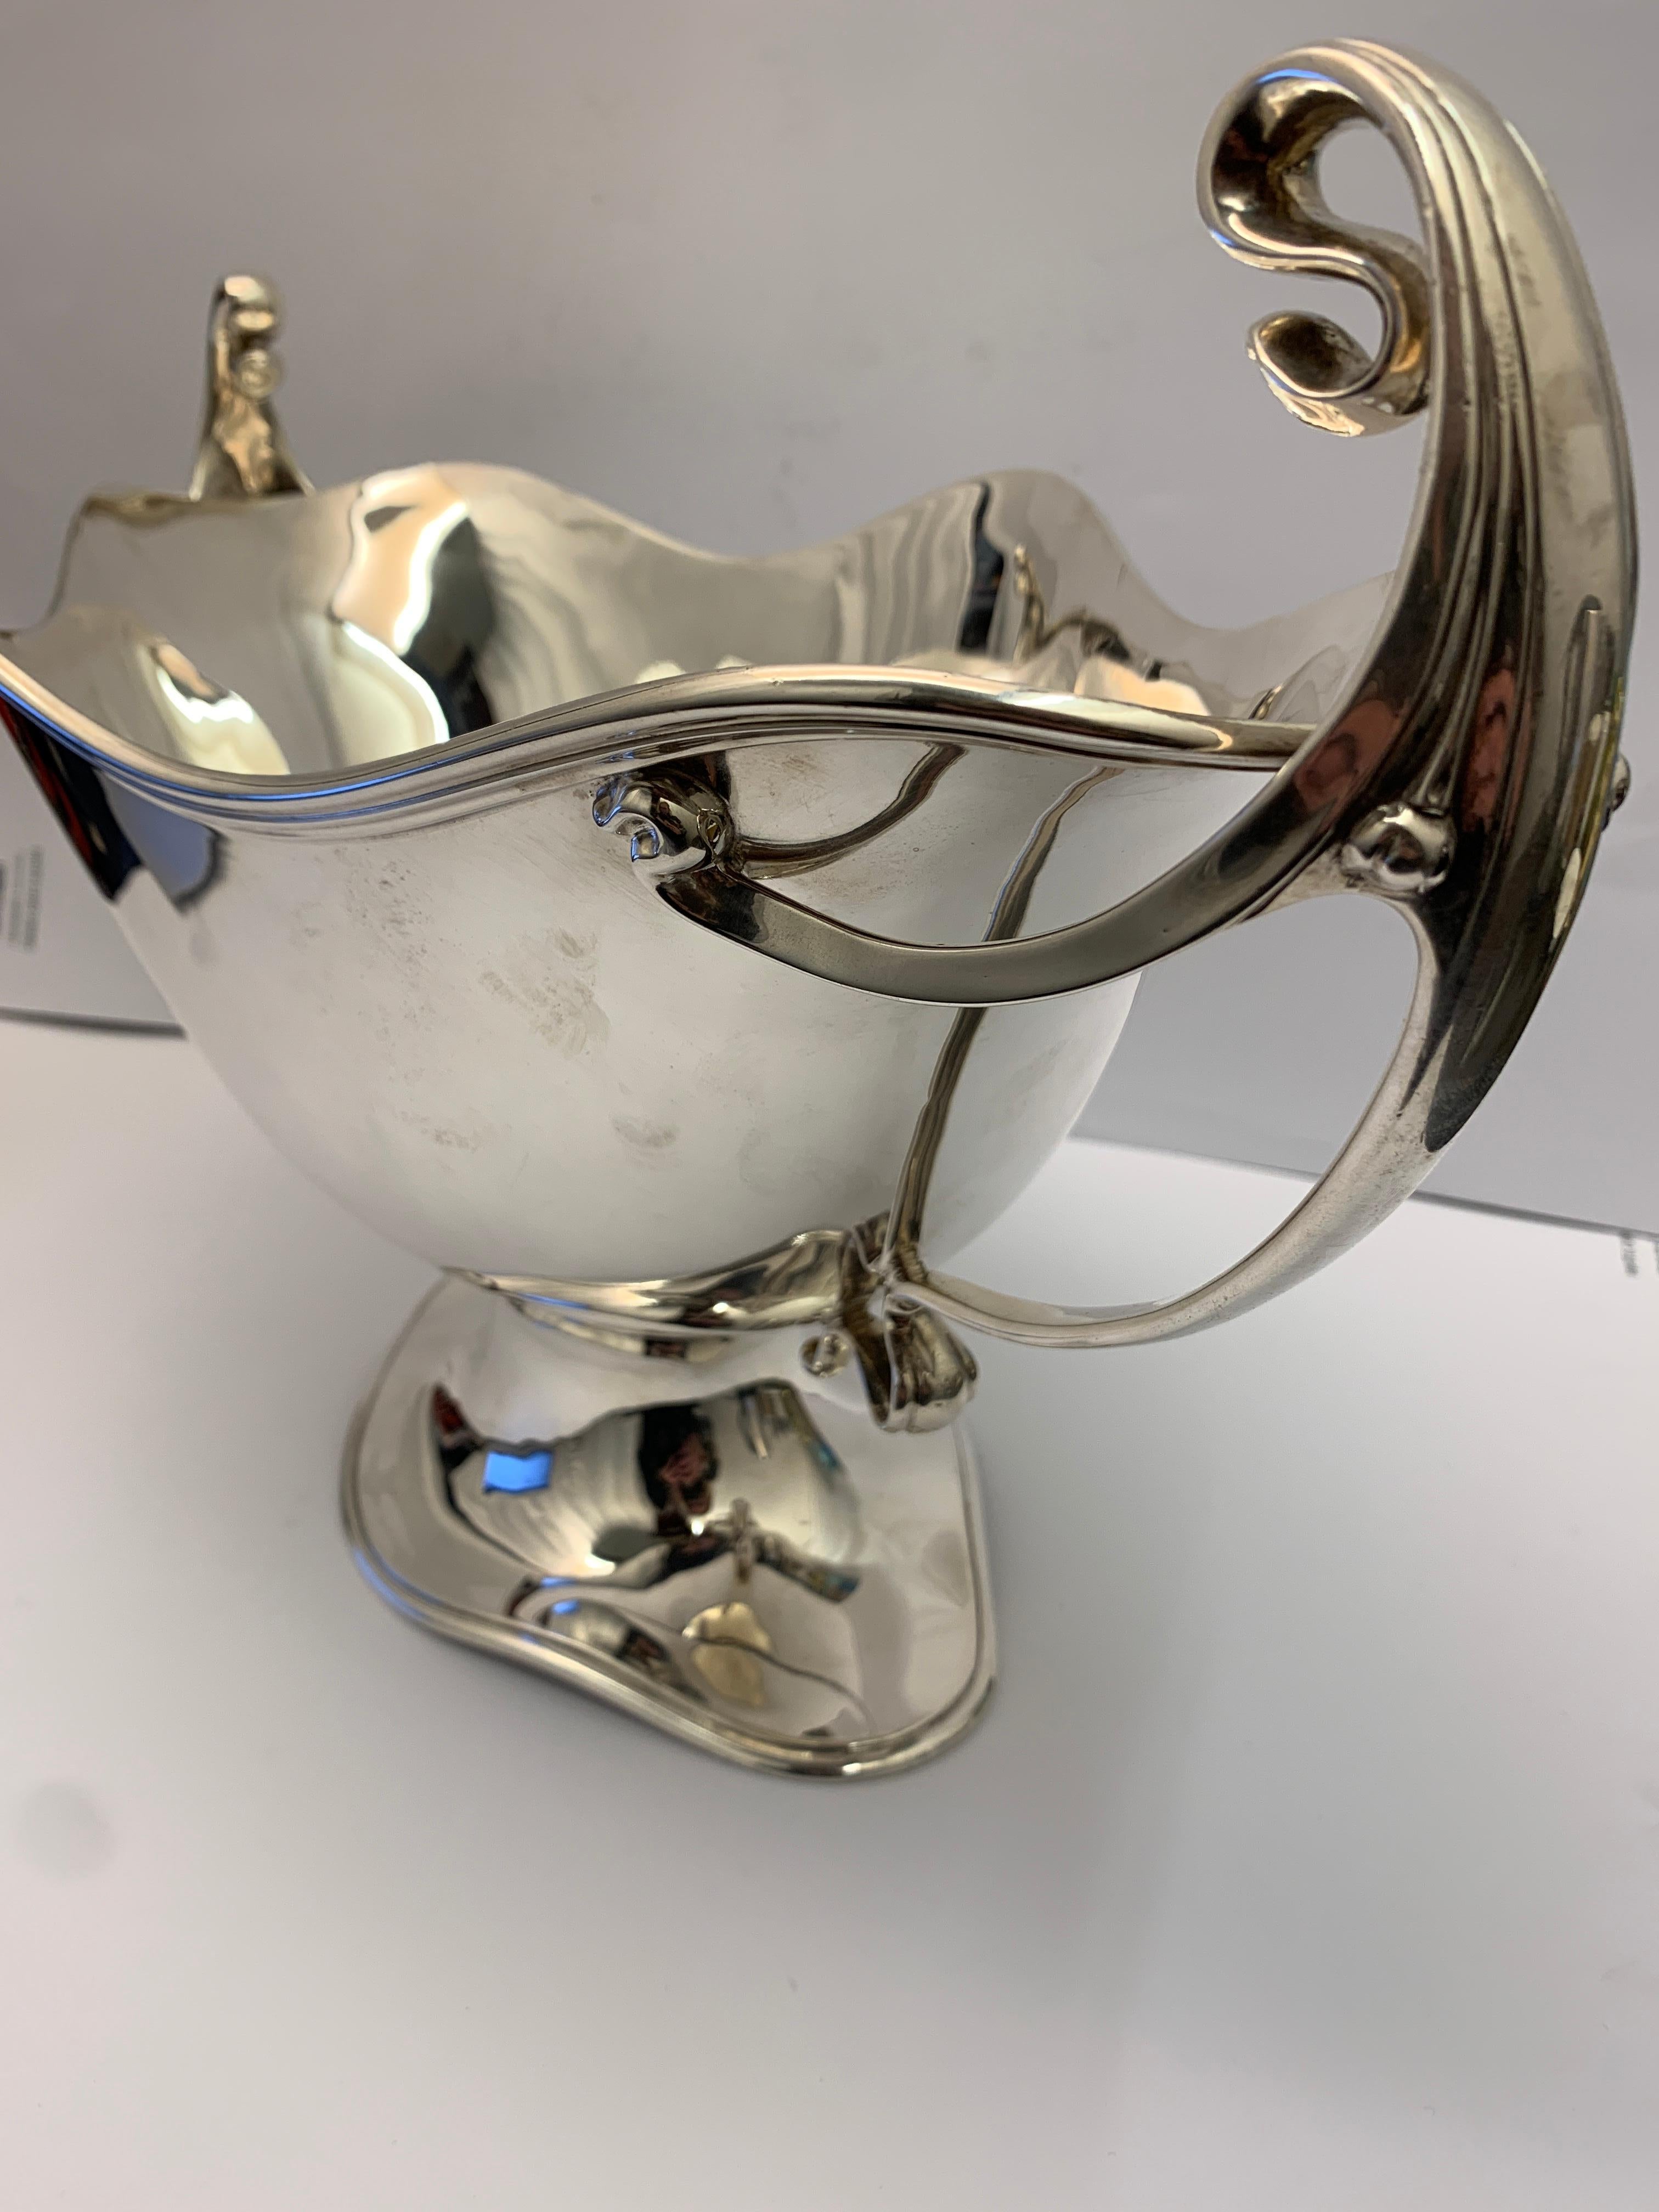 A large and heavy double handled silver centrepiece. Made by the Elkington company in Birmingham 1909.

Measuring at over 18 inches wide